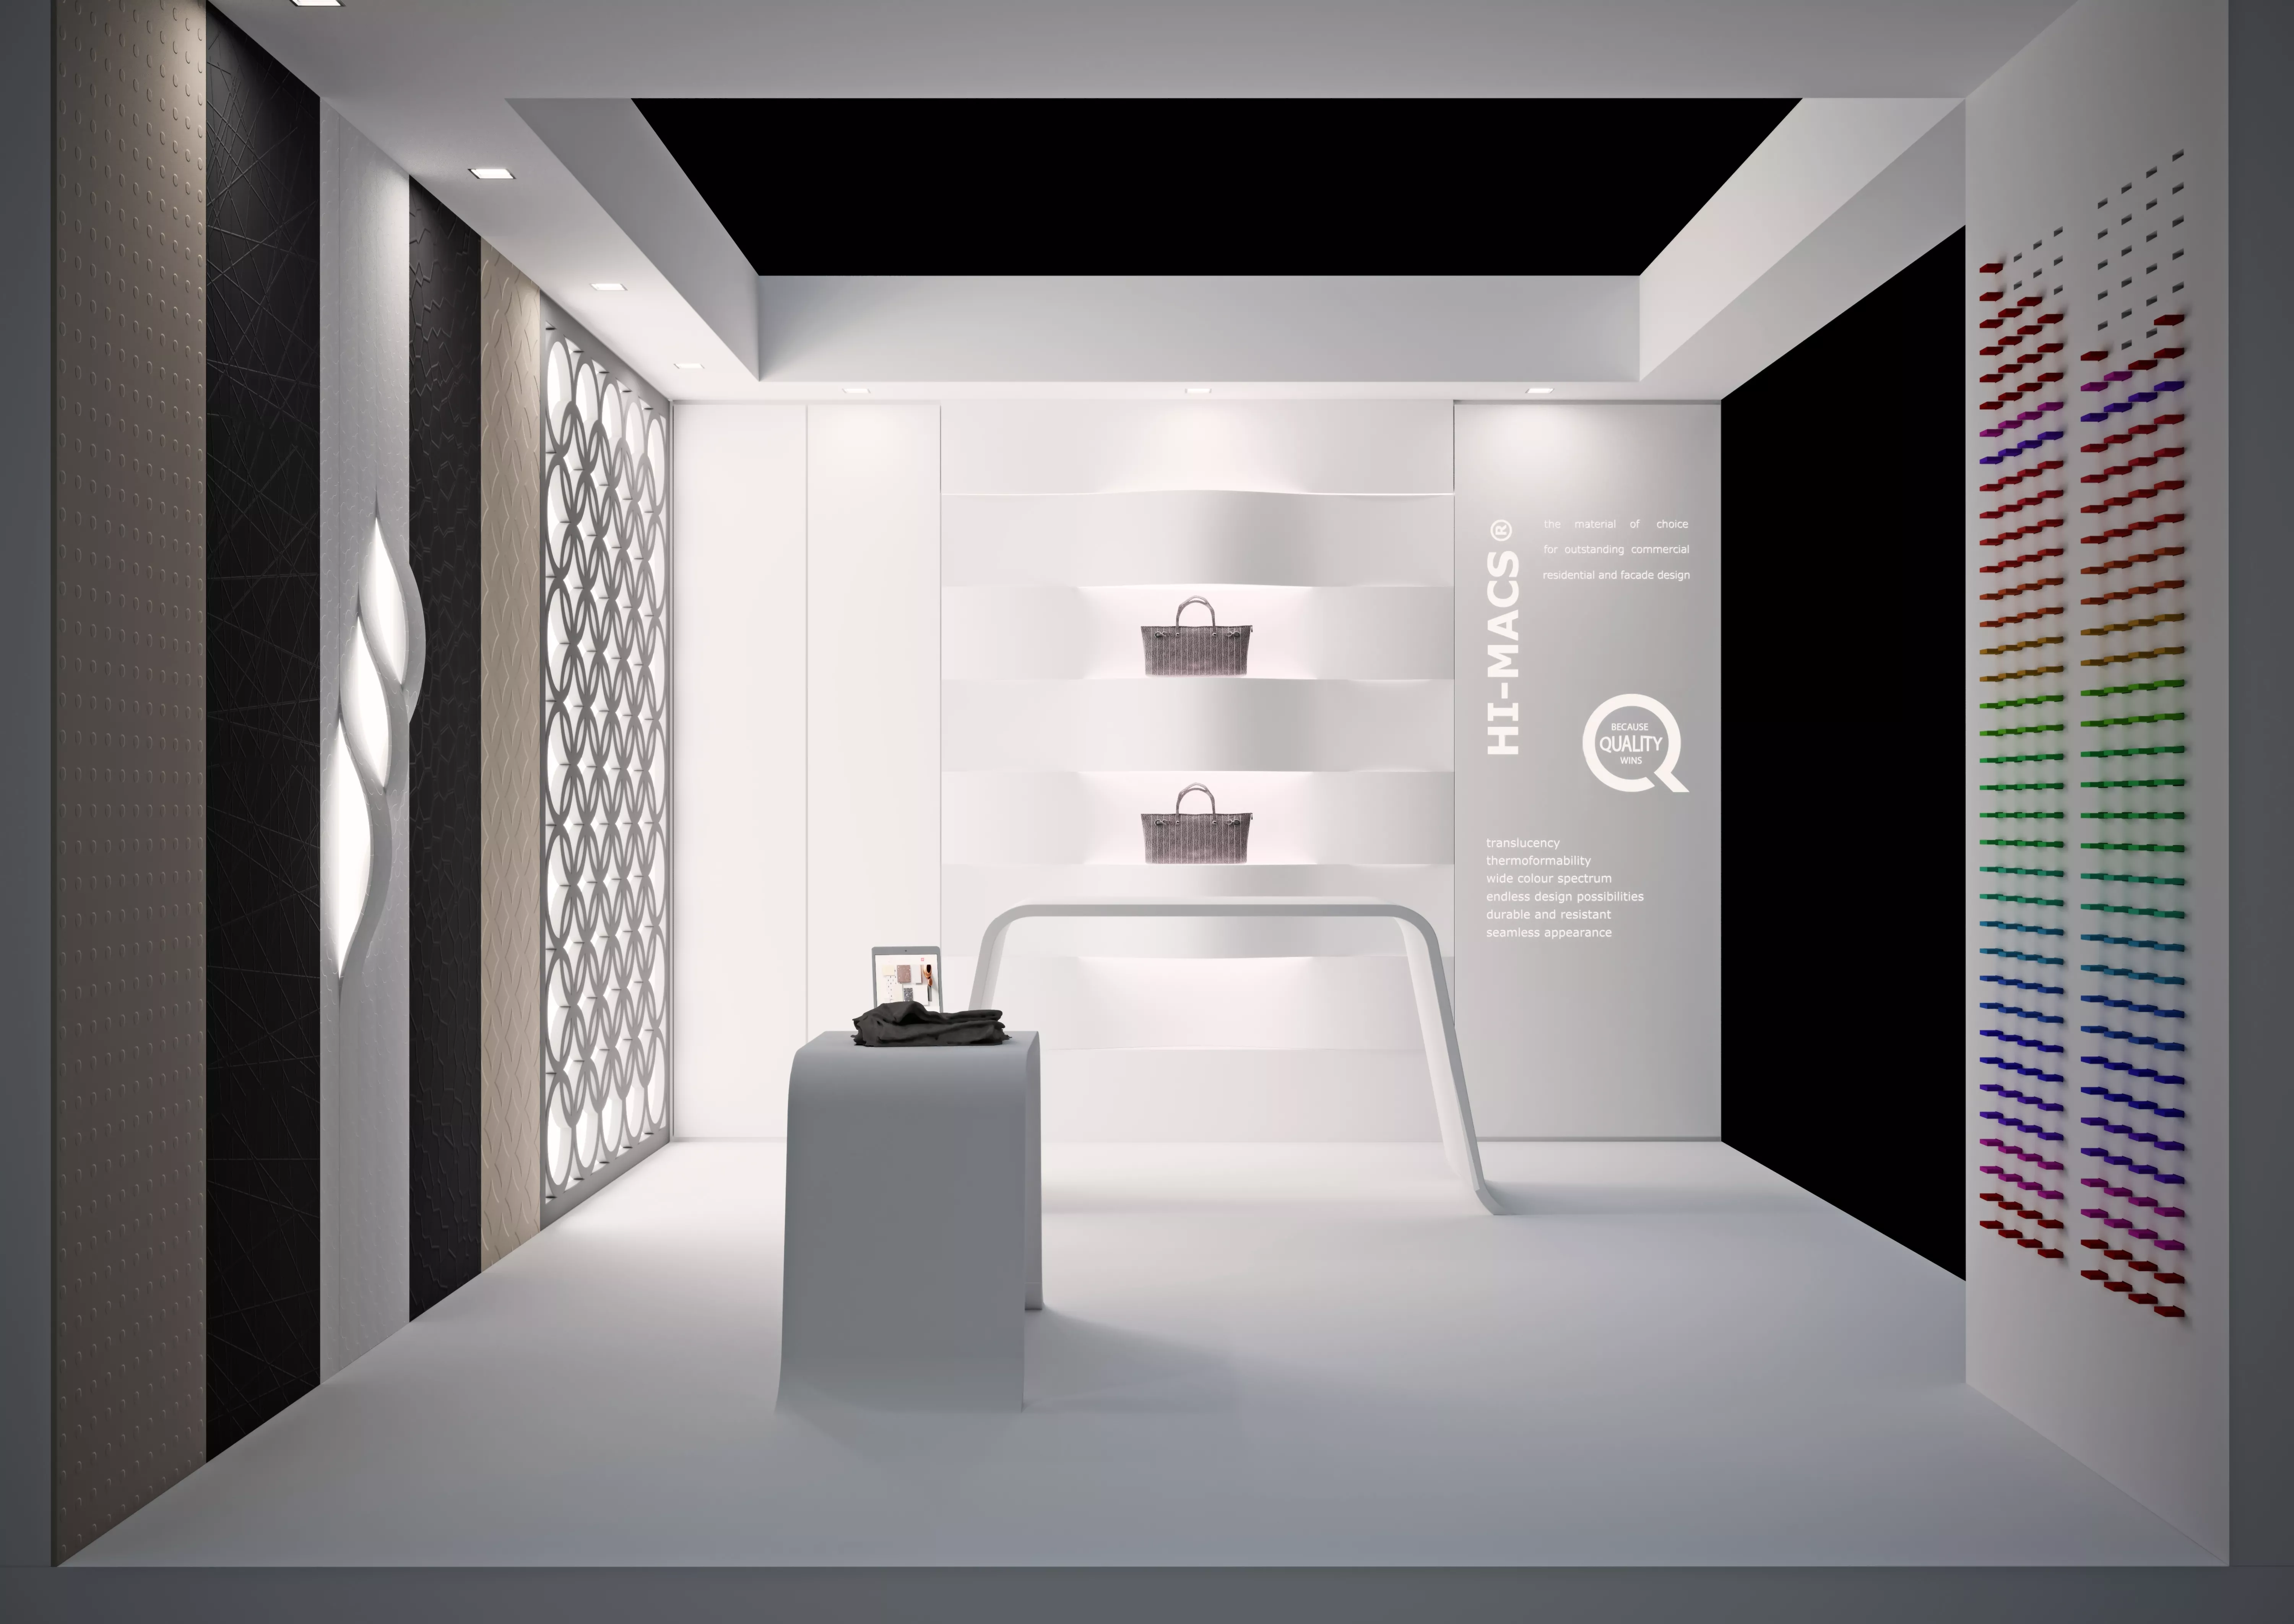 LX Hausys returns to Retail Design Expo with HIMACS Structura®